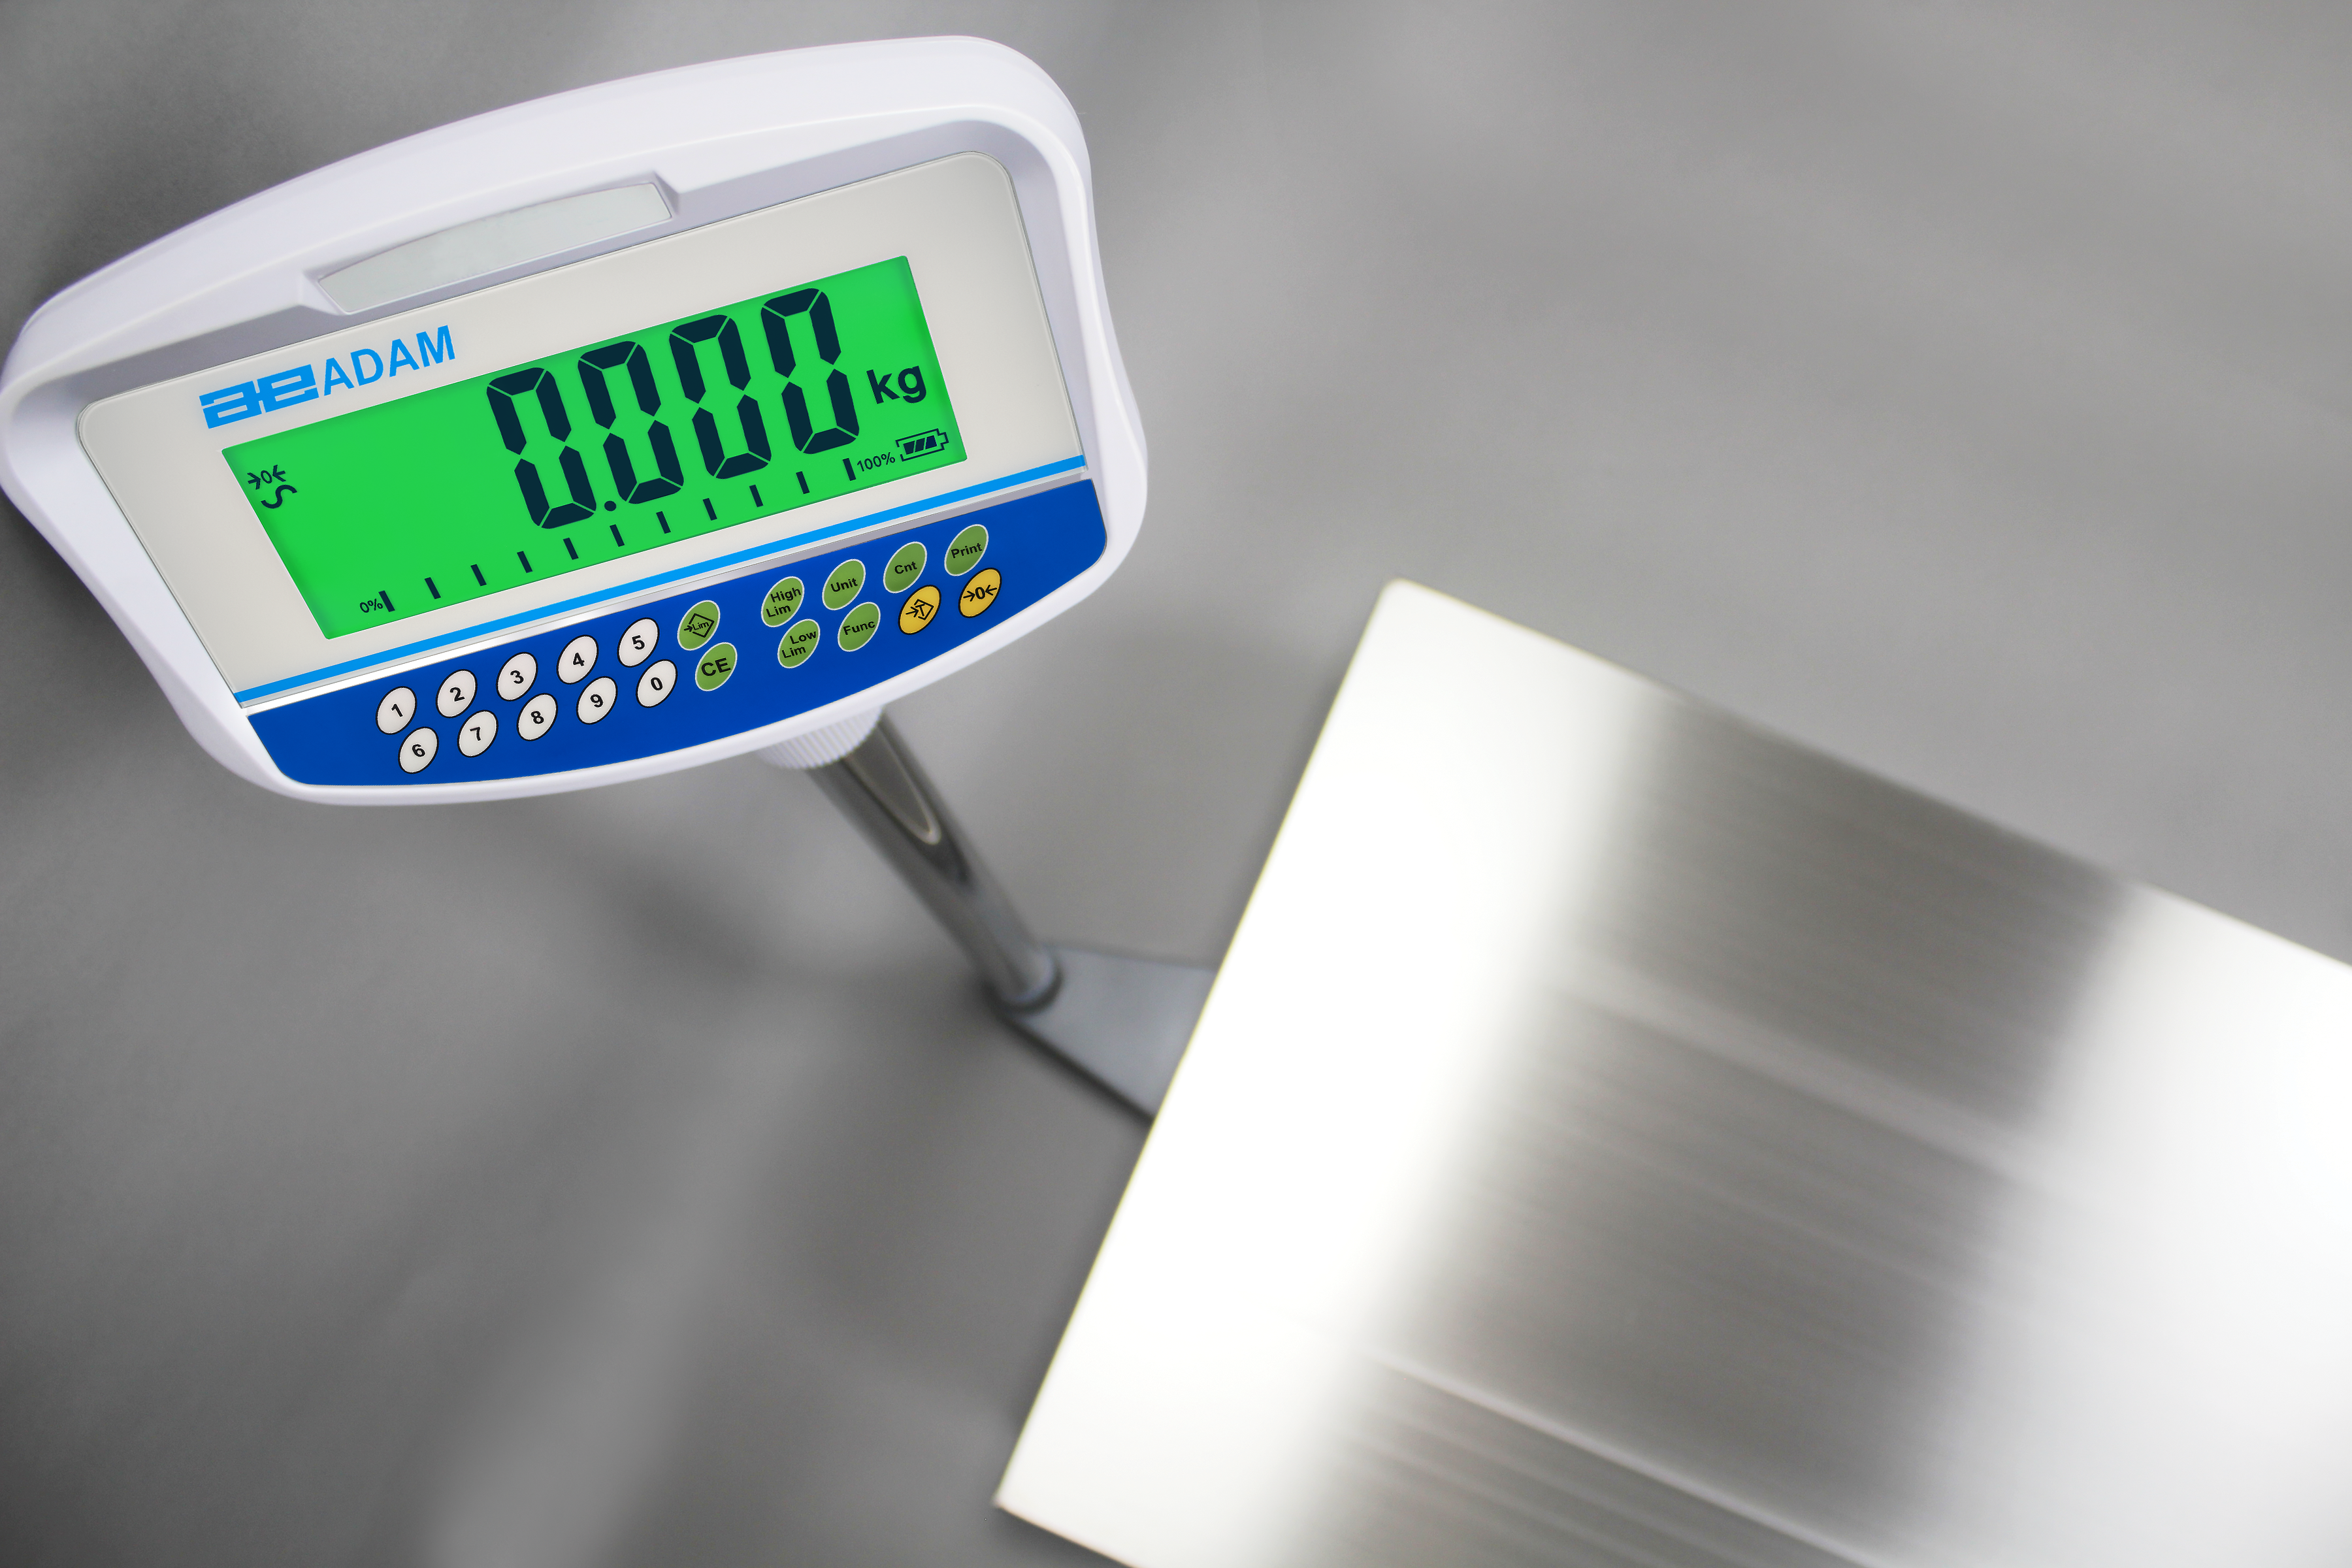 GBK-plus and GFK-plus bench and floor checkweighing scales